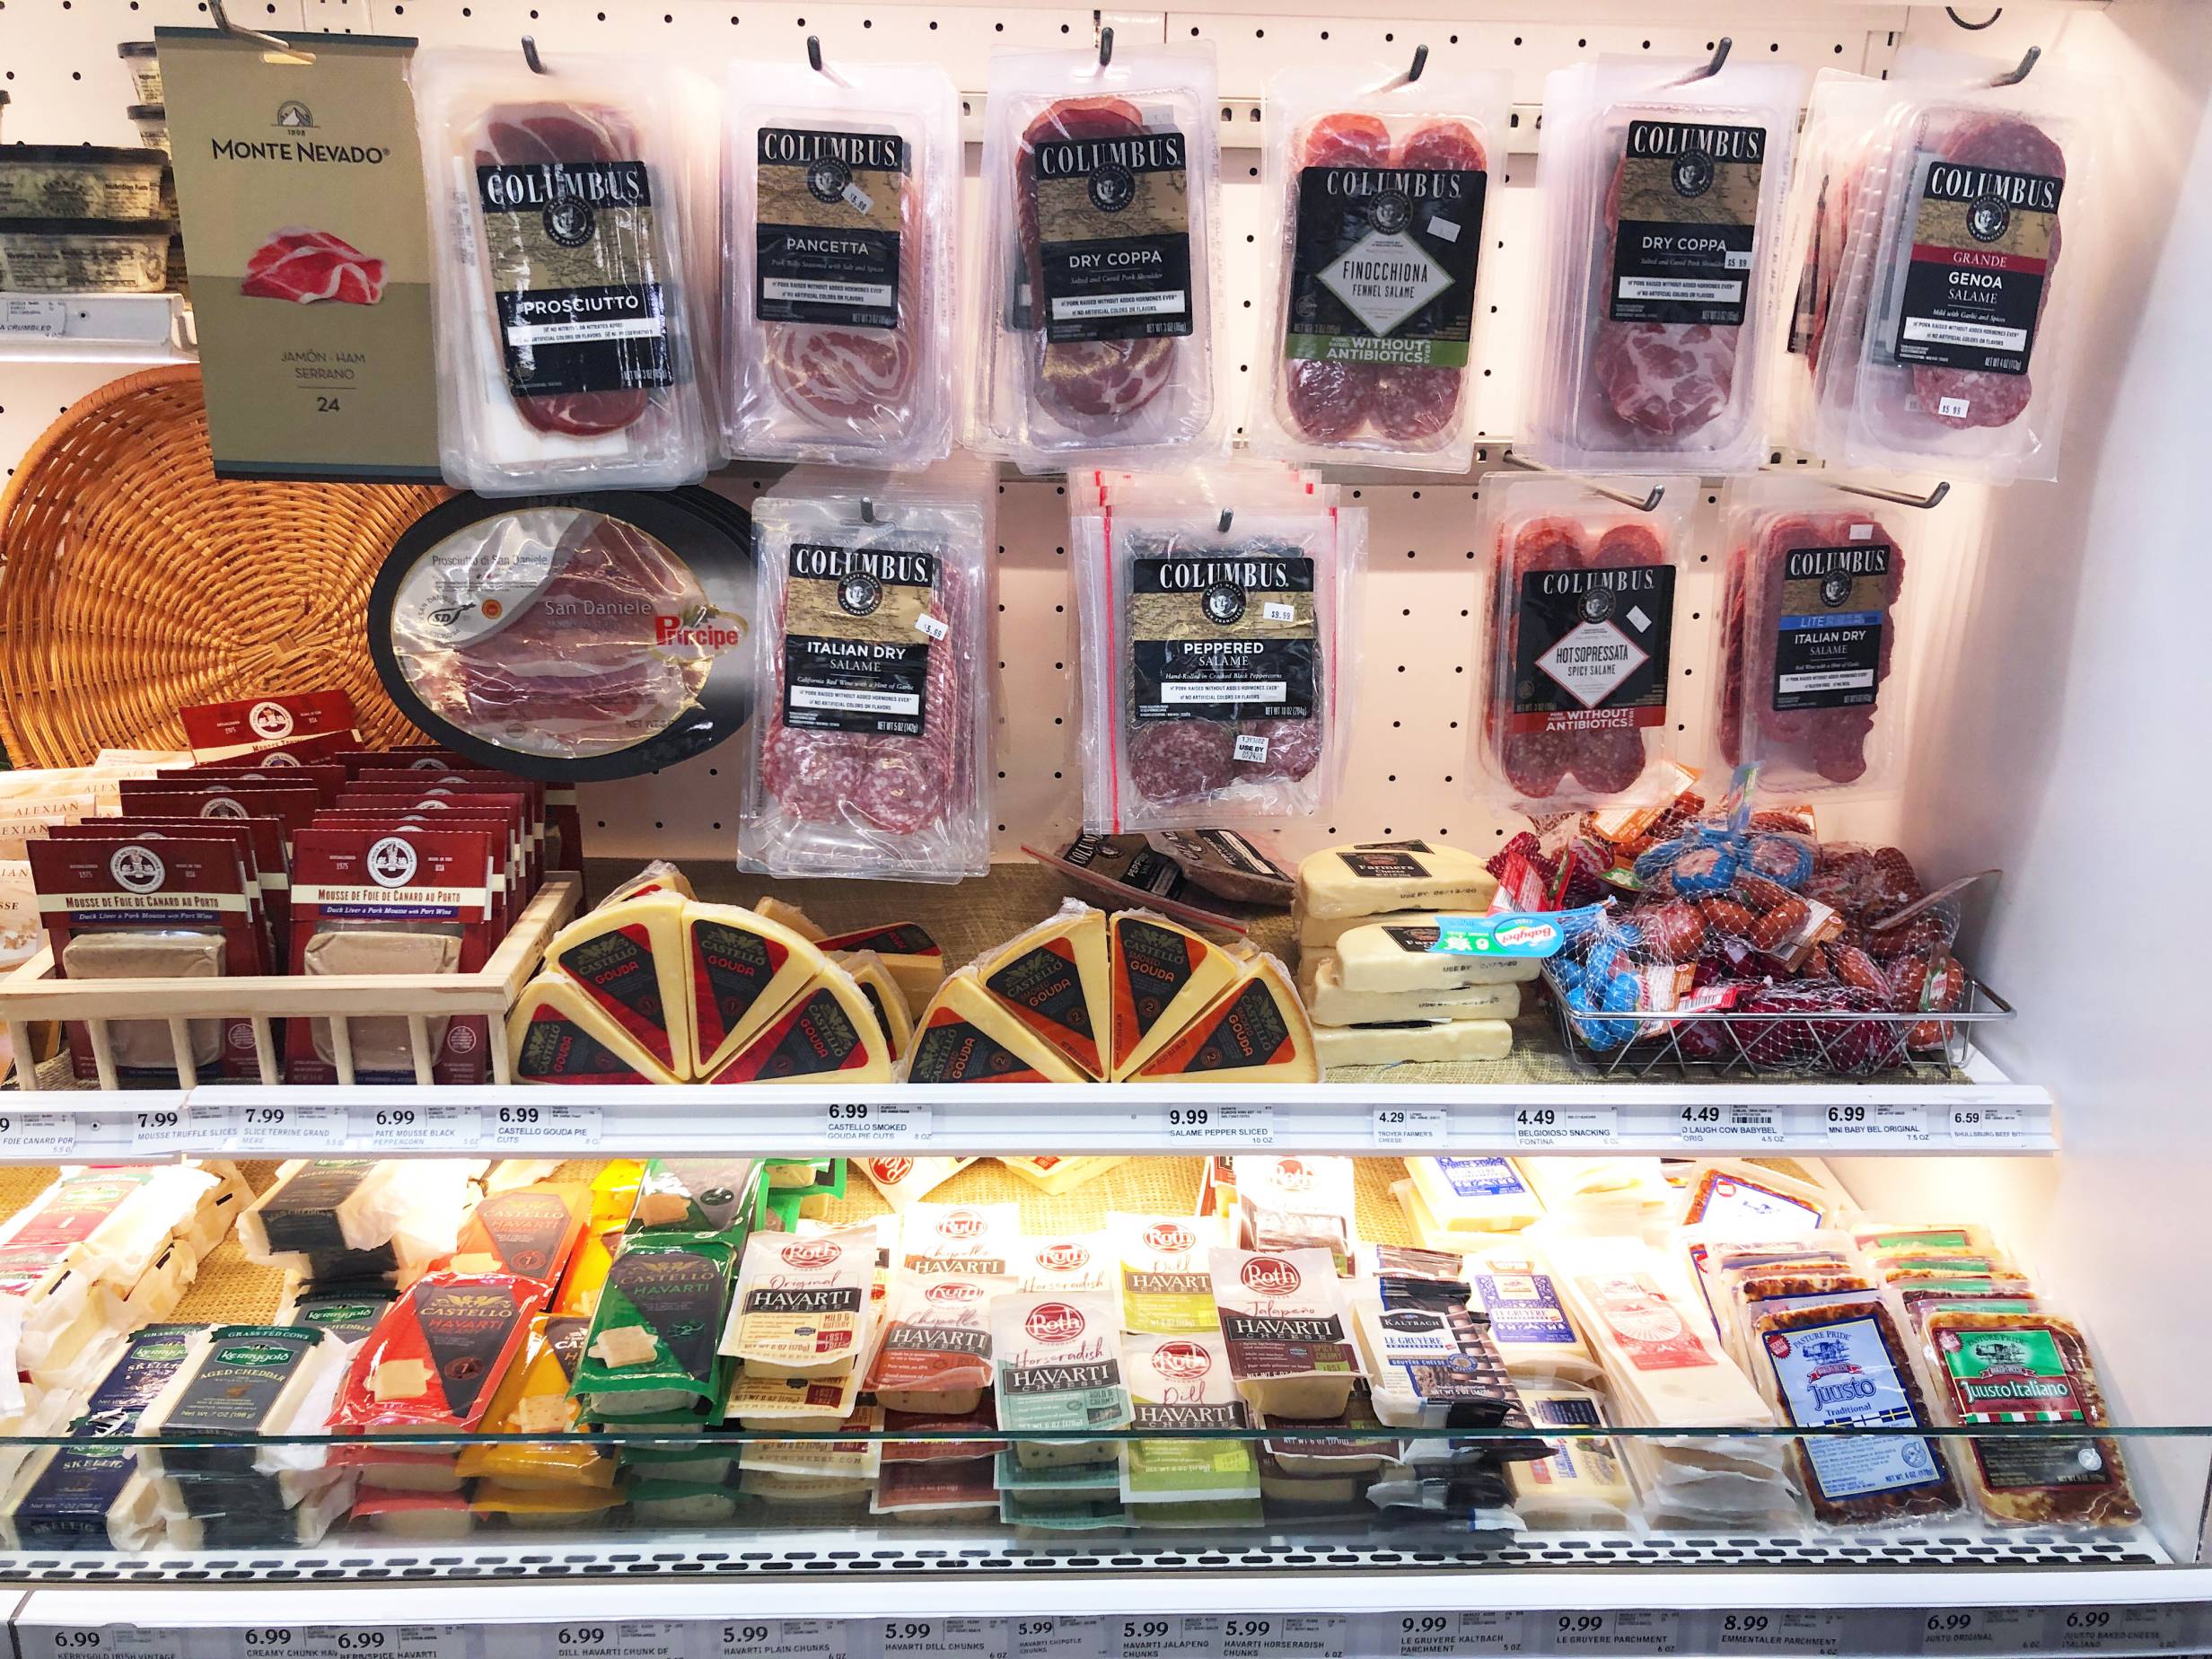 The meat section of Harvest Market has many packaged deli meats hanging from metal hooks. Below the meat are more wedges and rectangles of packaged cheeses in a white display case. Photo by Alyssa Buckley.